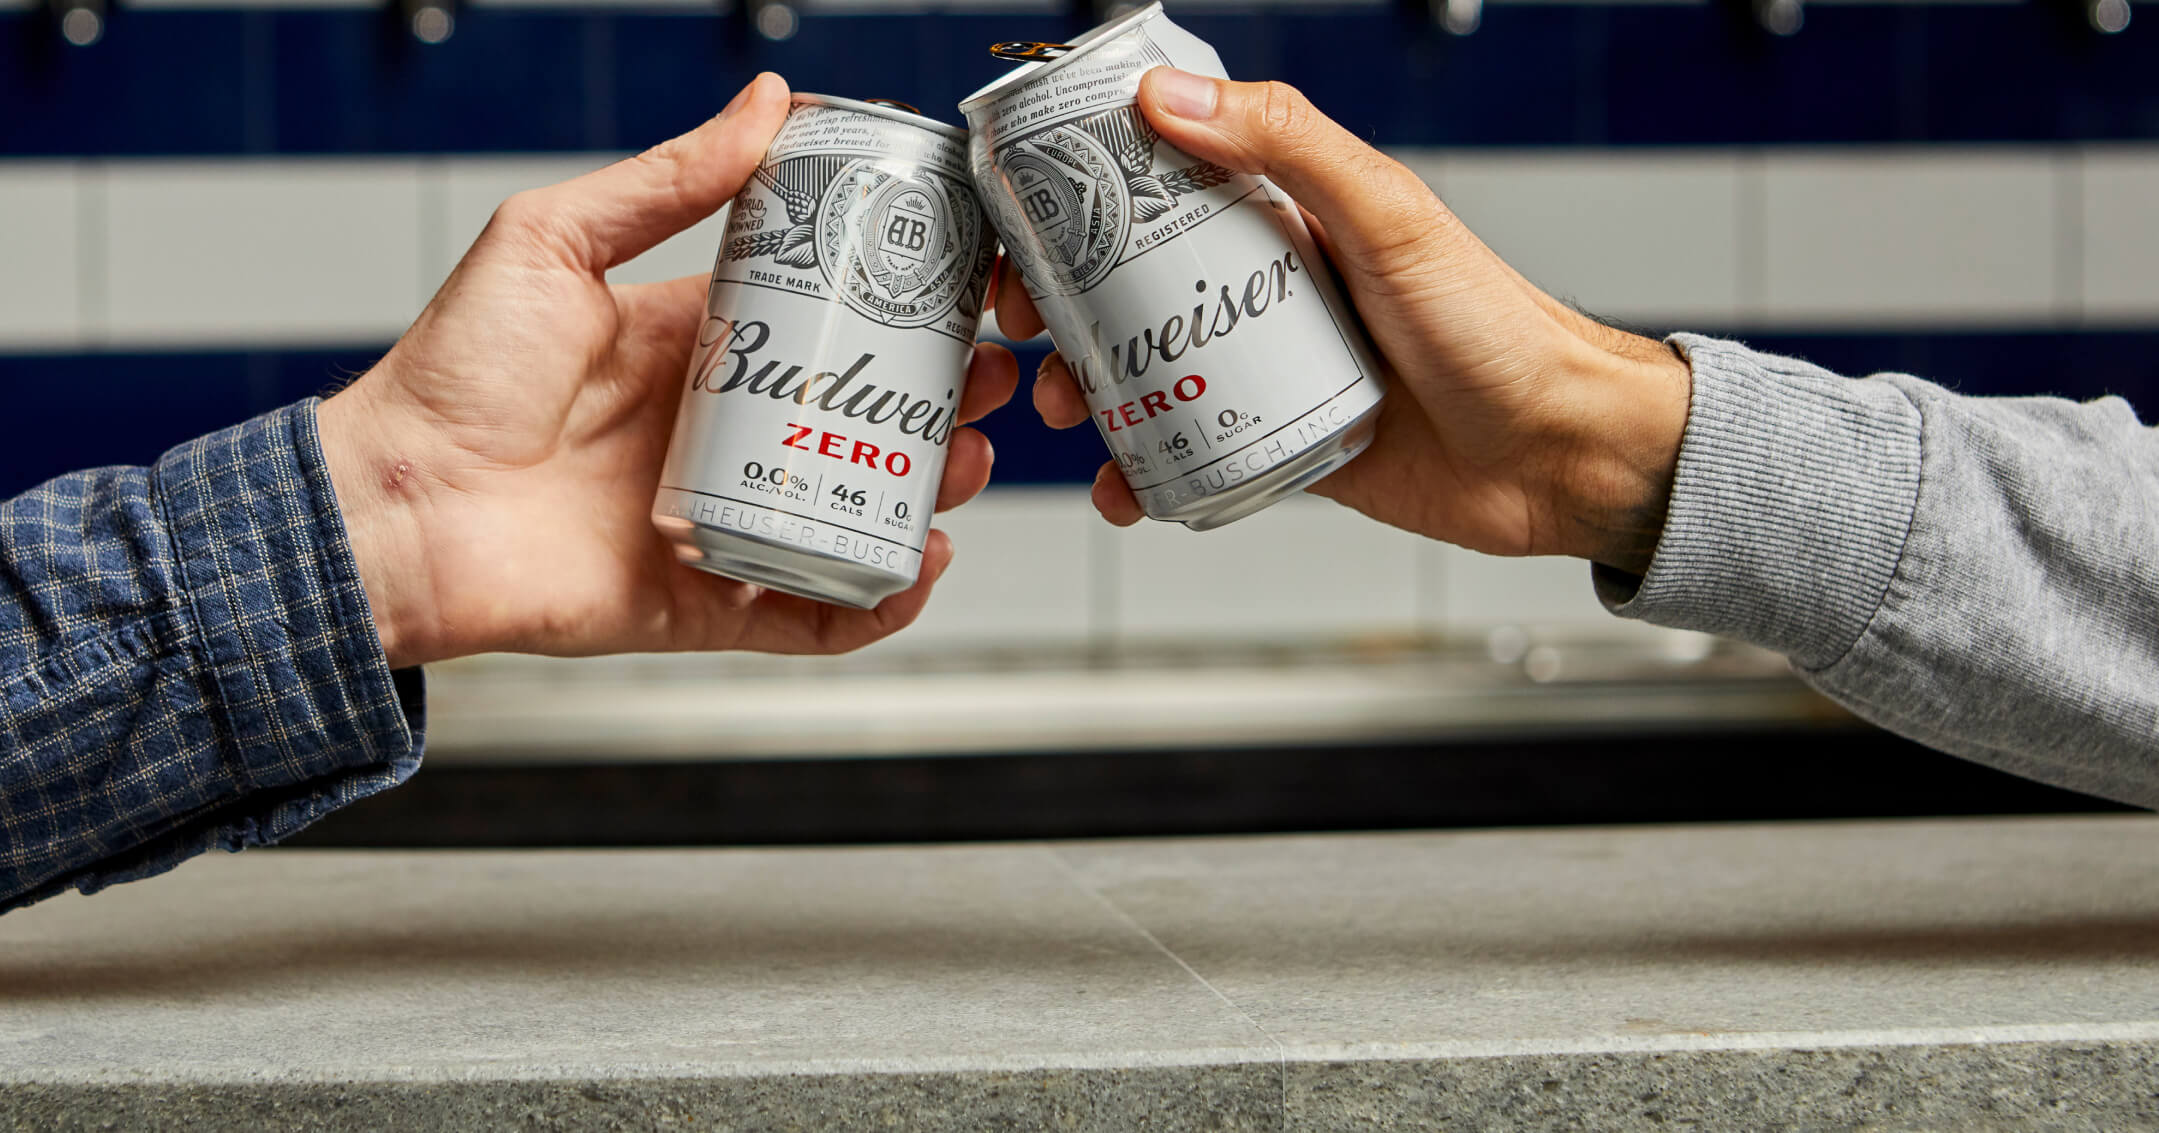 Budweiser Brewing Group can cheers